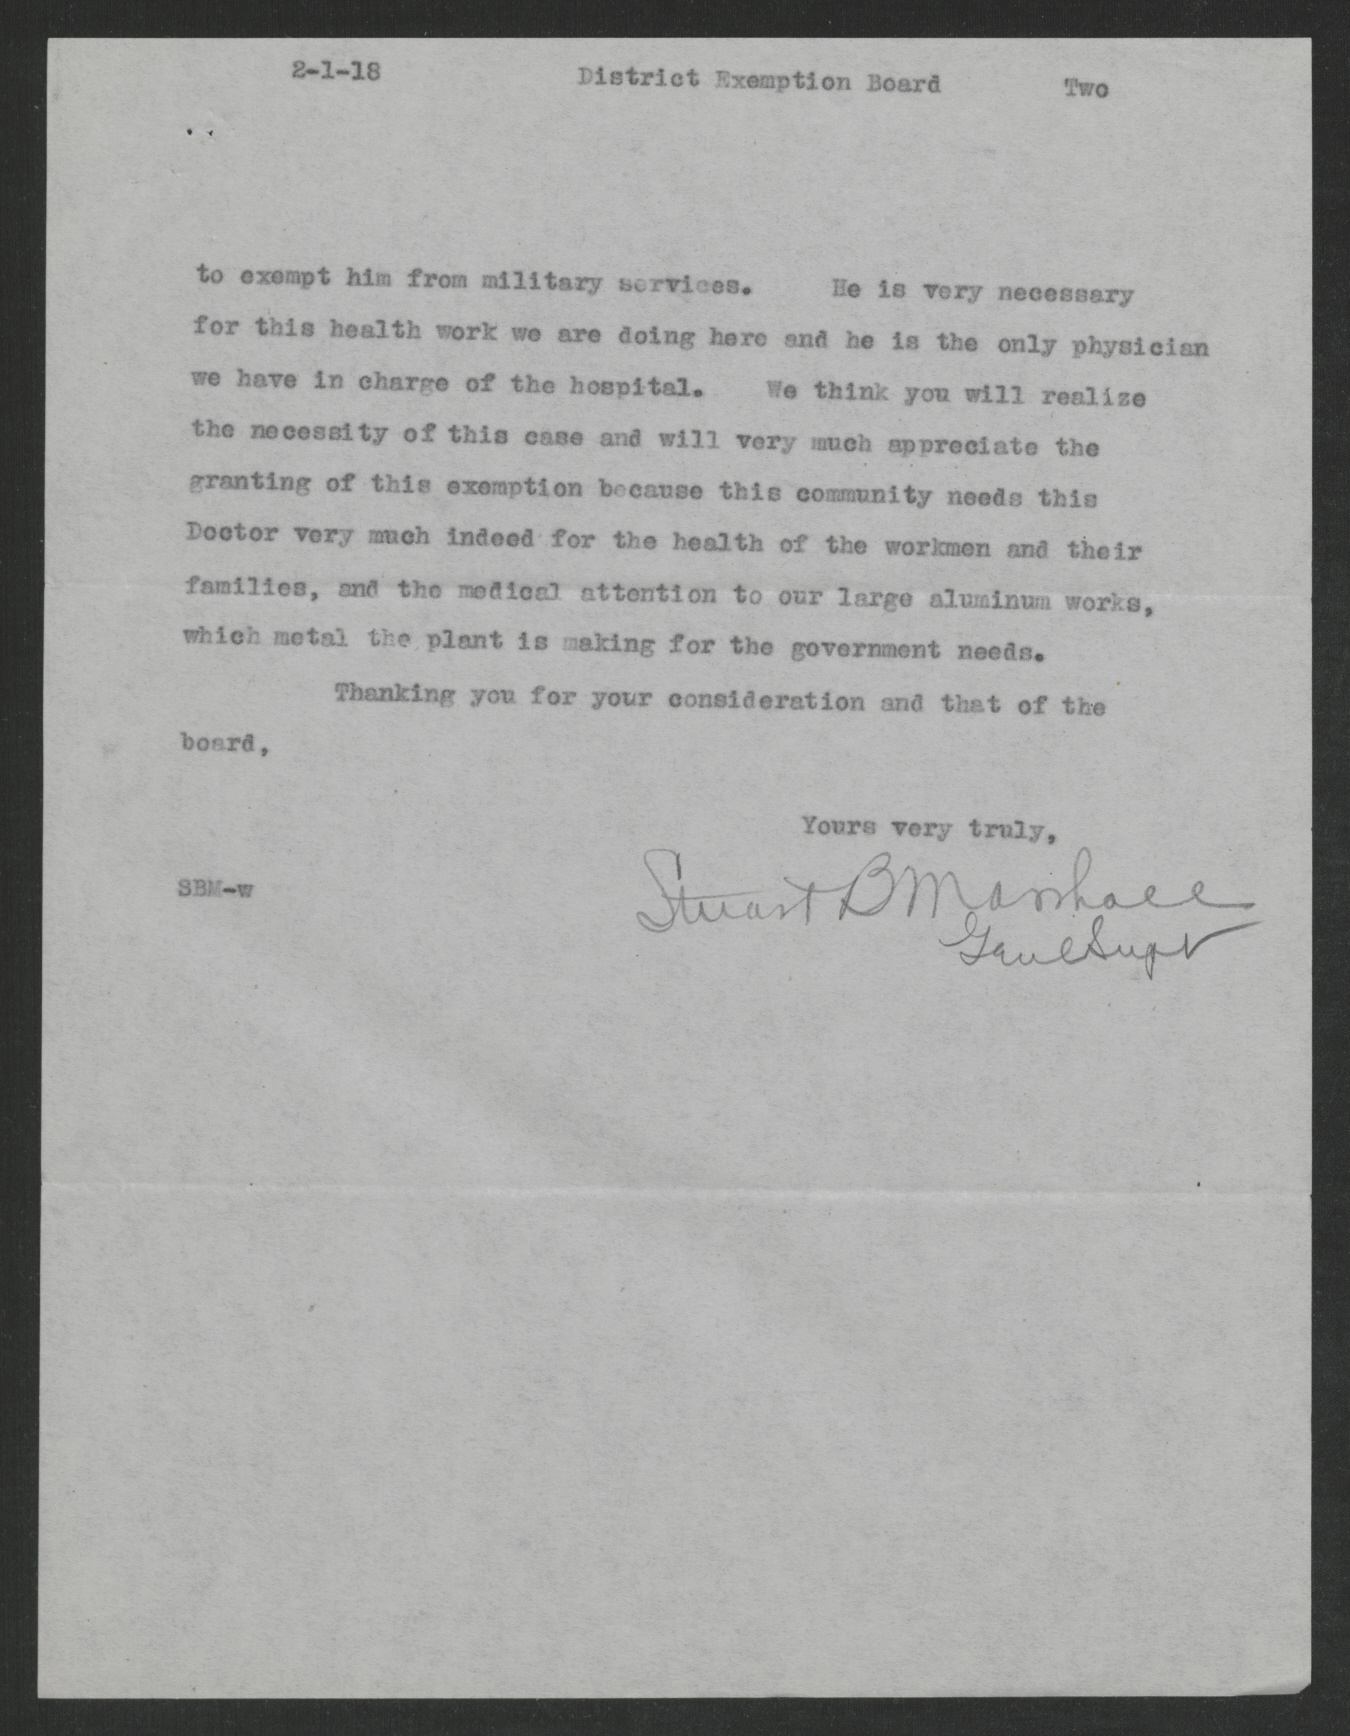 Letter from Stuart B. Marshall to the Western District Exemption Board, February 1, 1918, page 2